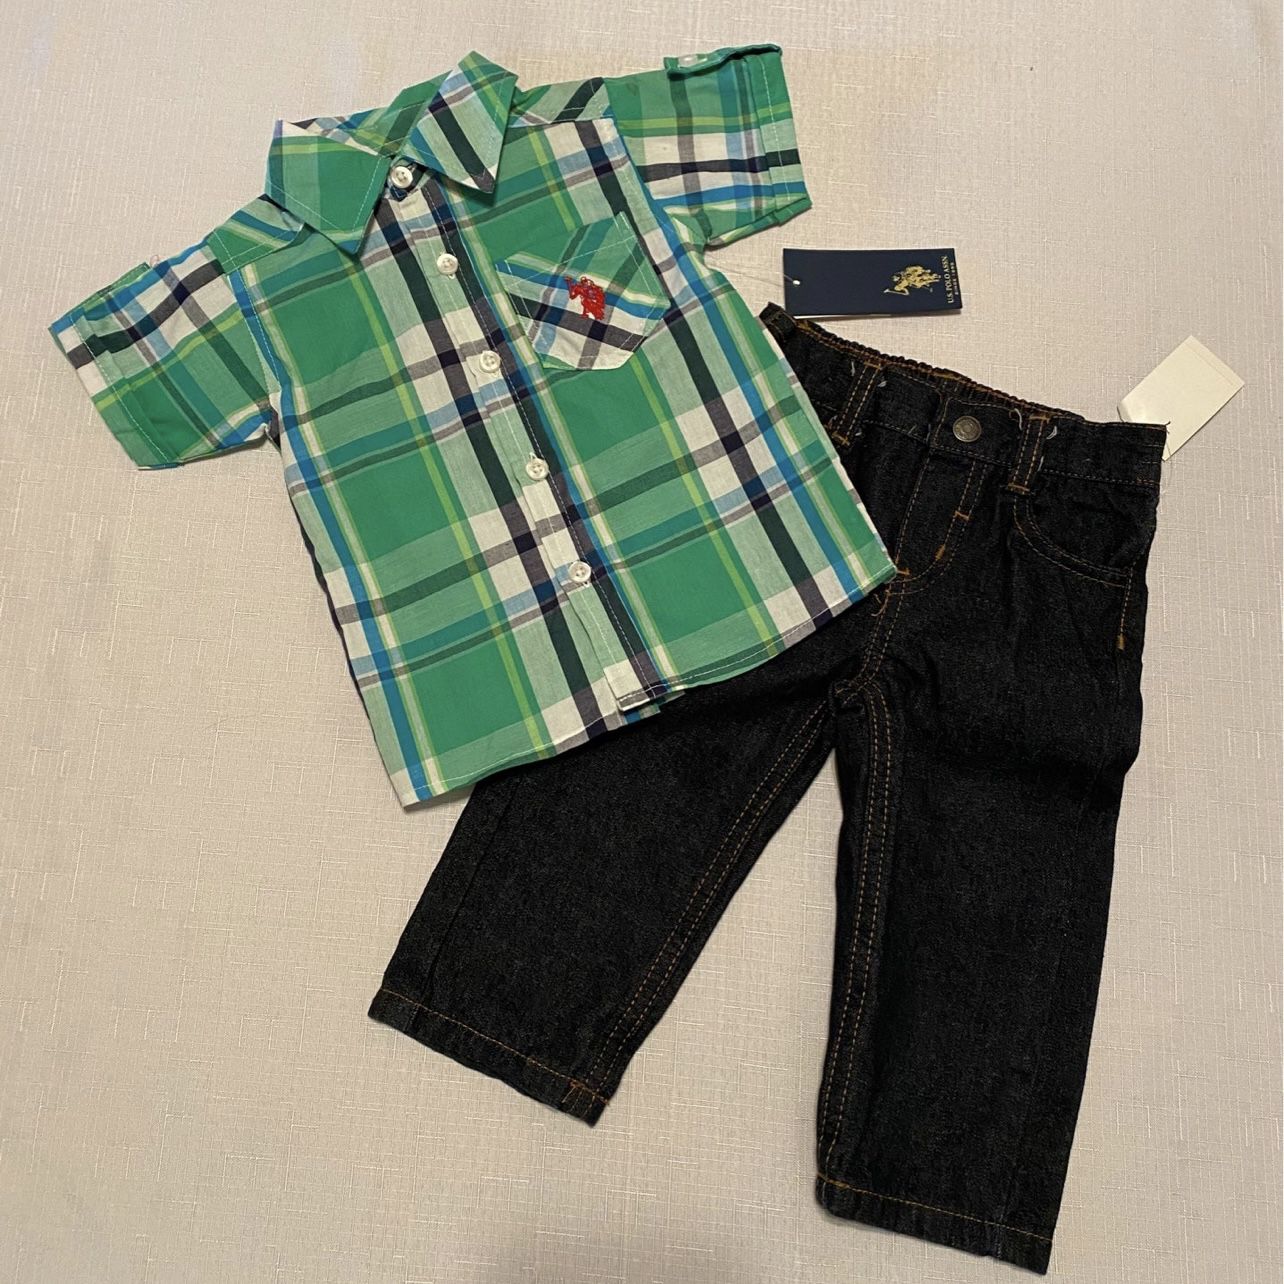 2 Outfits for Boys 12M